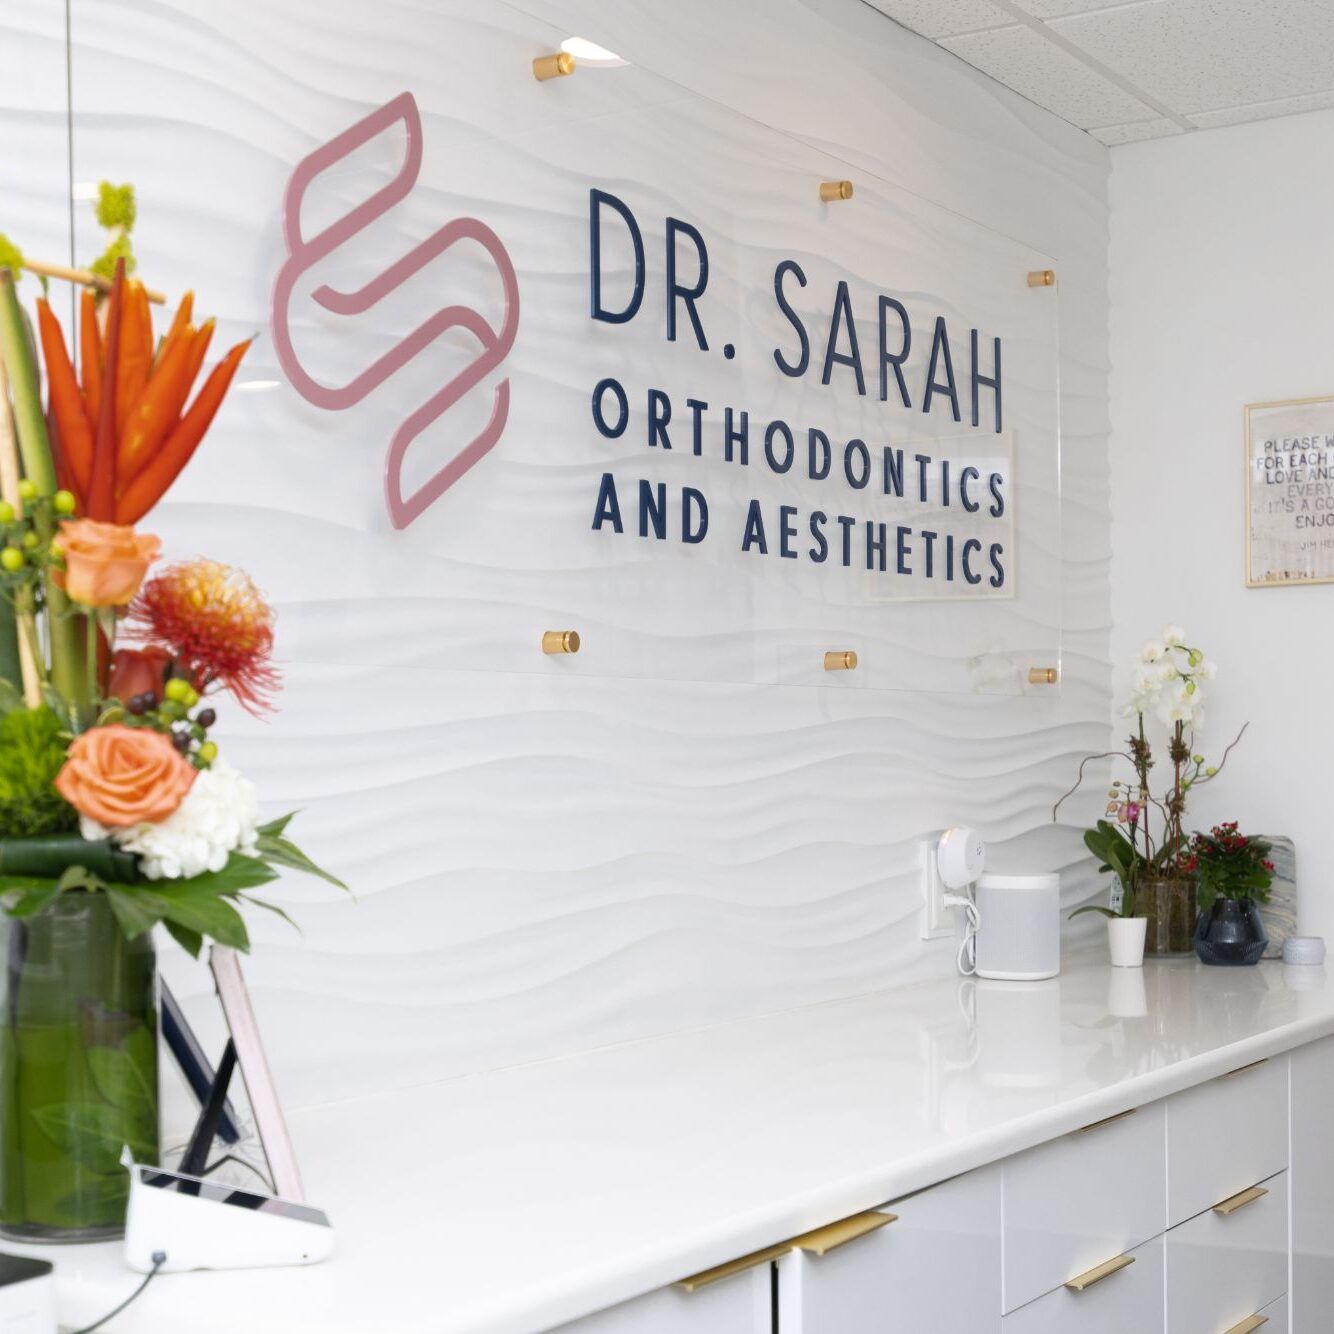 a sign for dr. sarah orthodontics and aesthetics